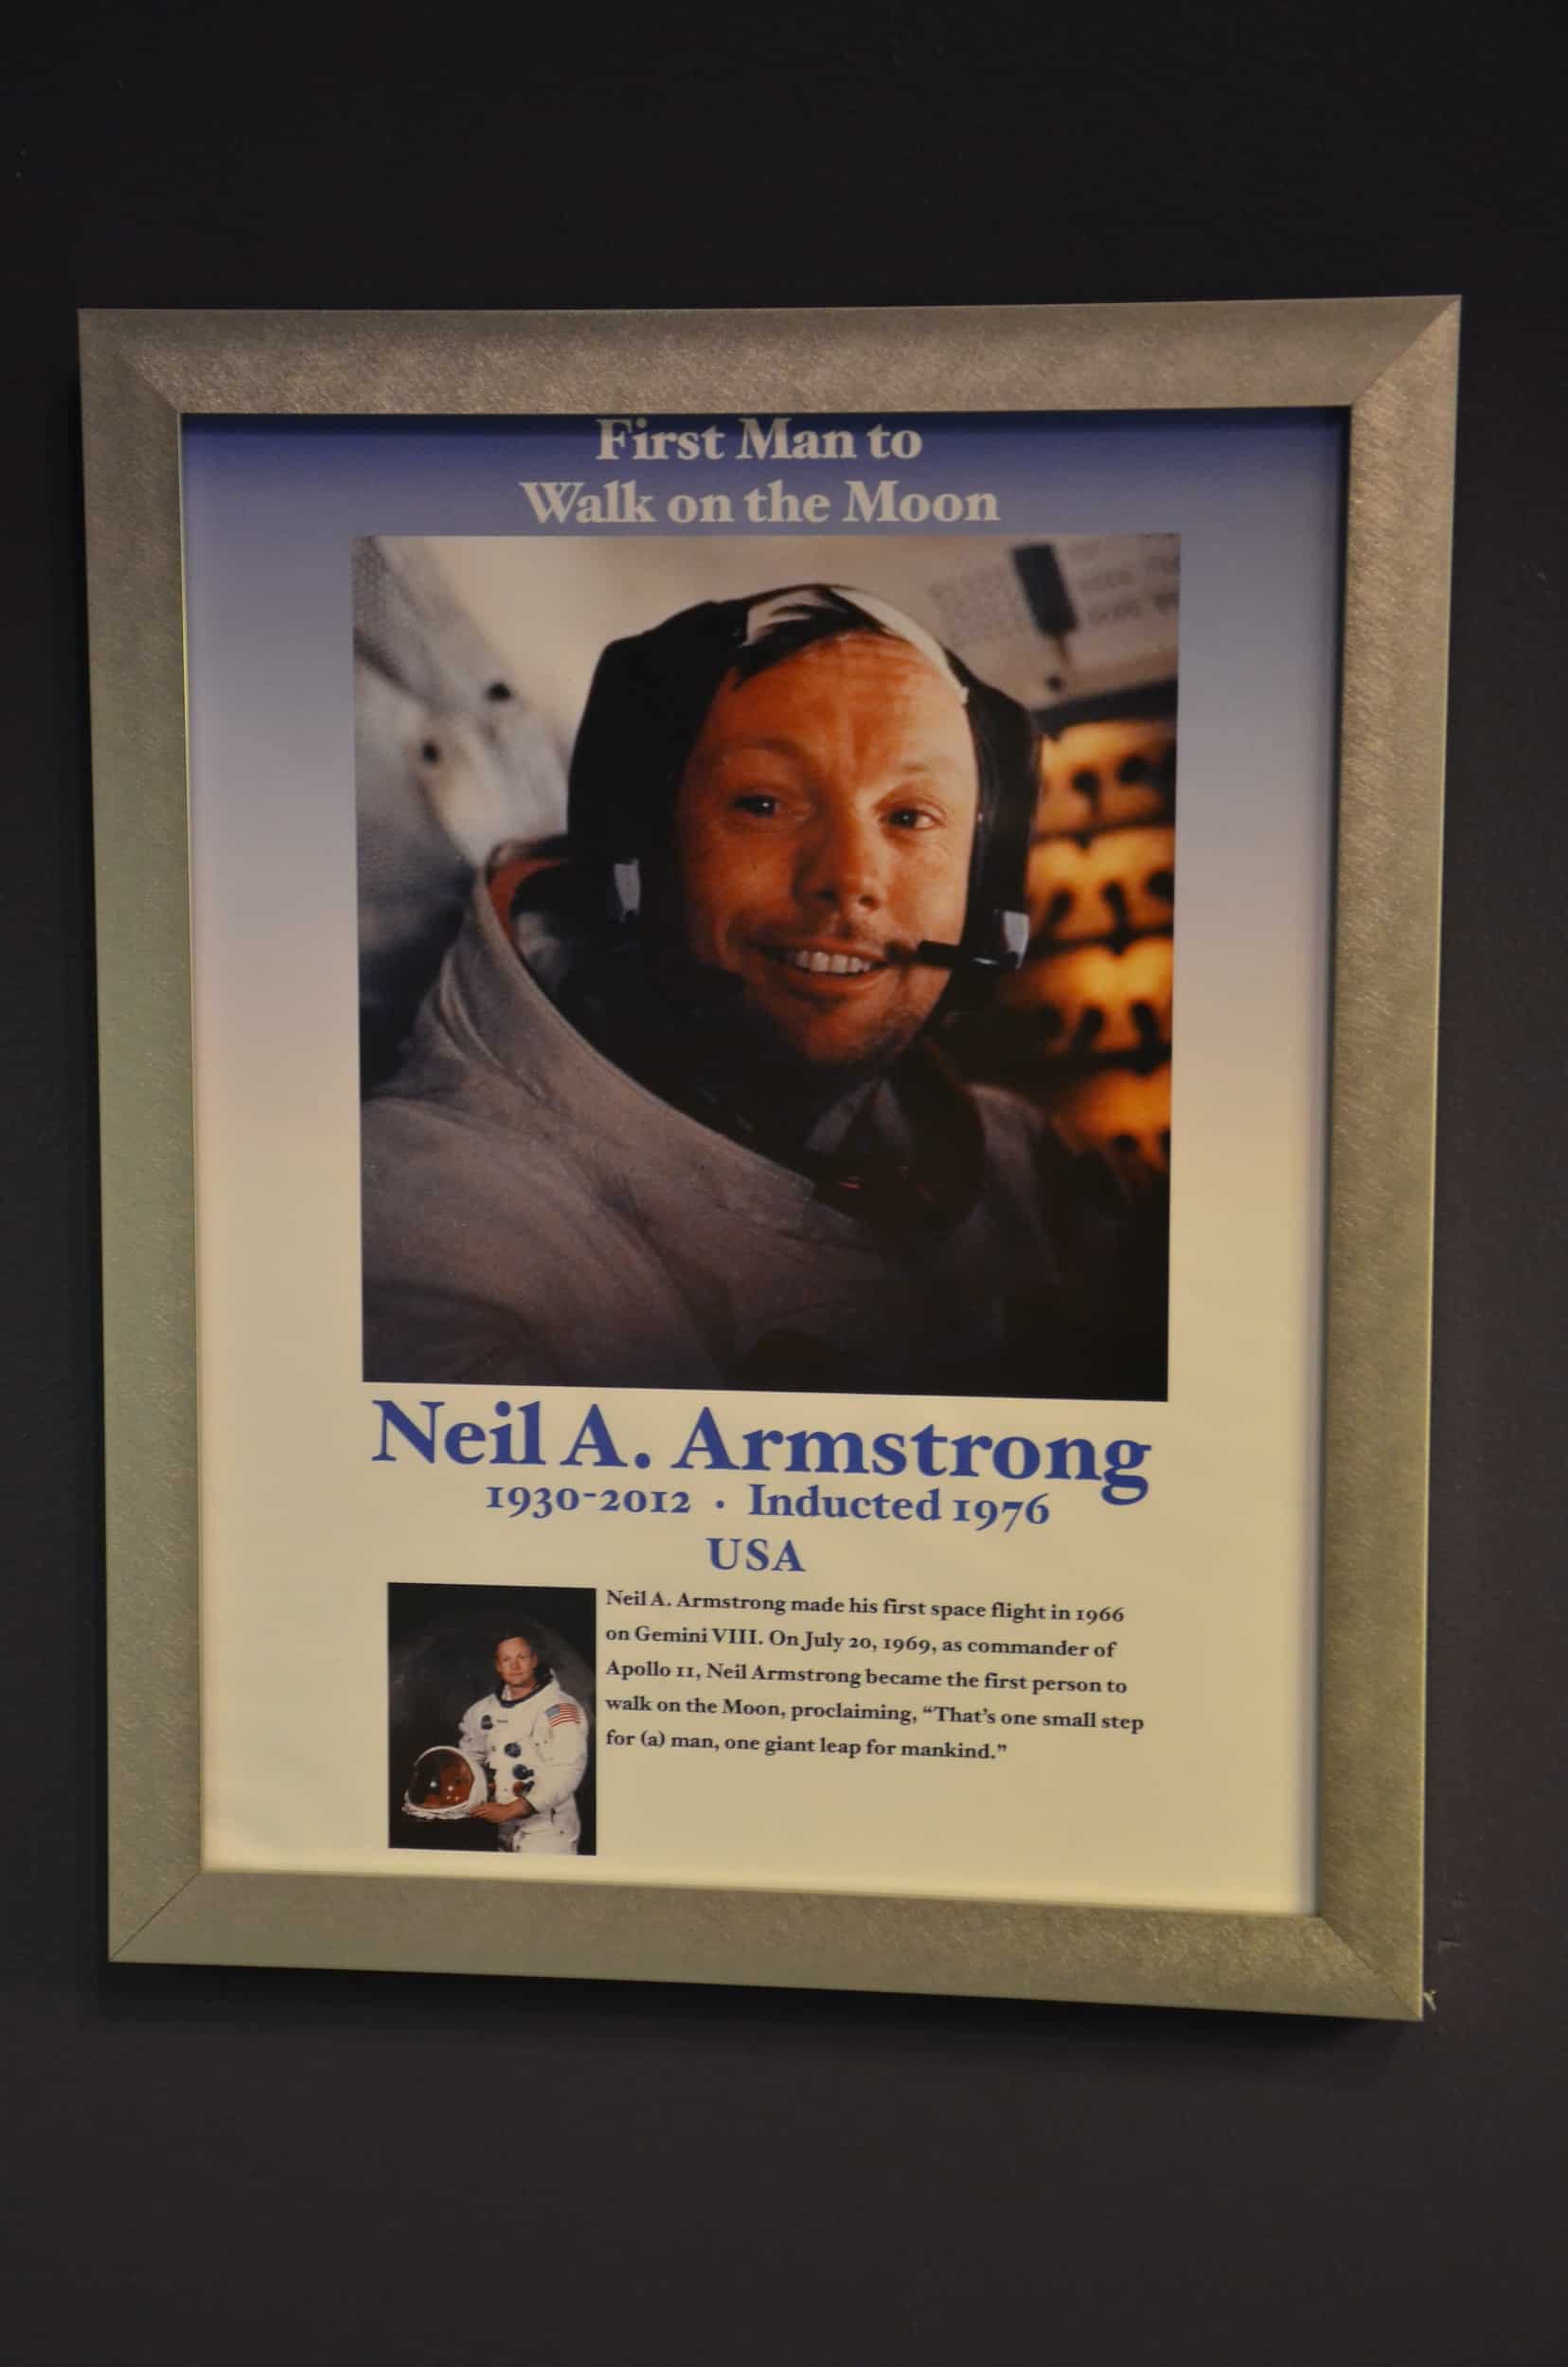 Neil Armstrong in the International Space Hall of Fame at the New Mexico Museum of Space History in Alamogordo, New Mexico